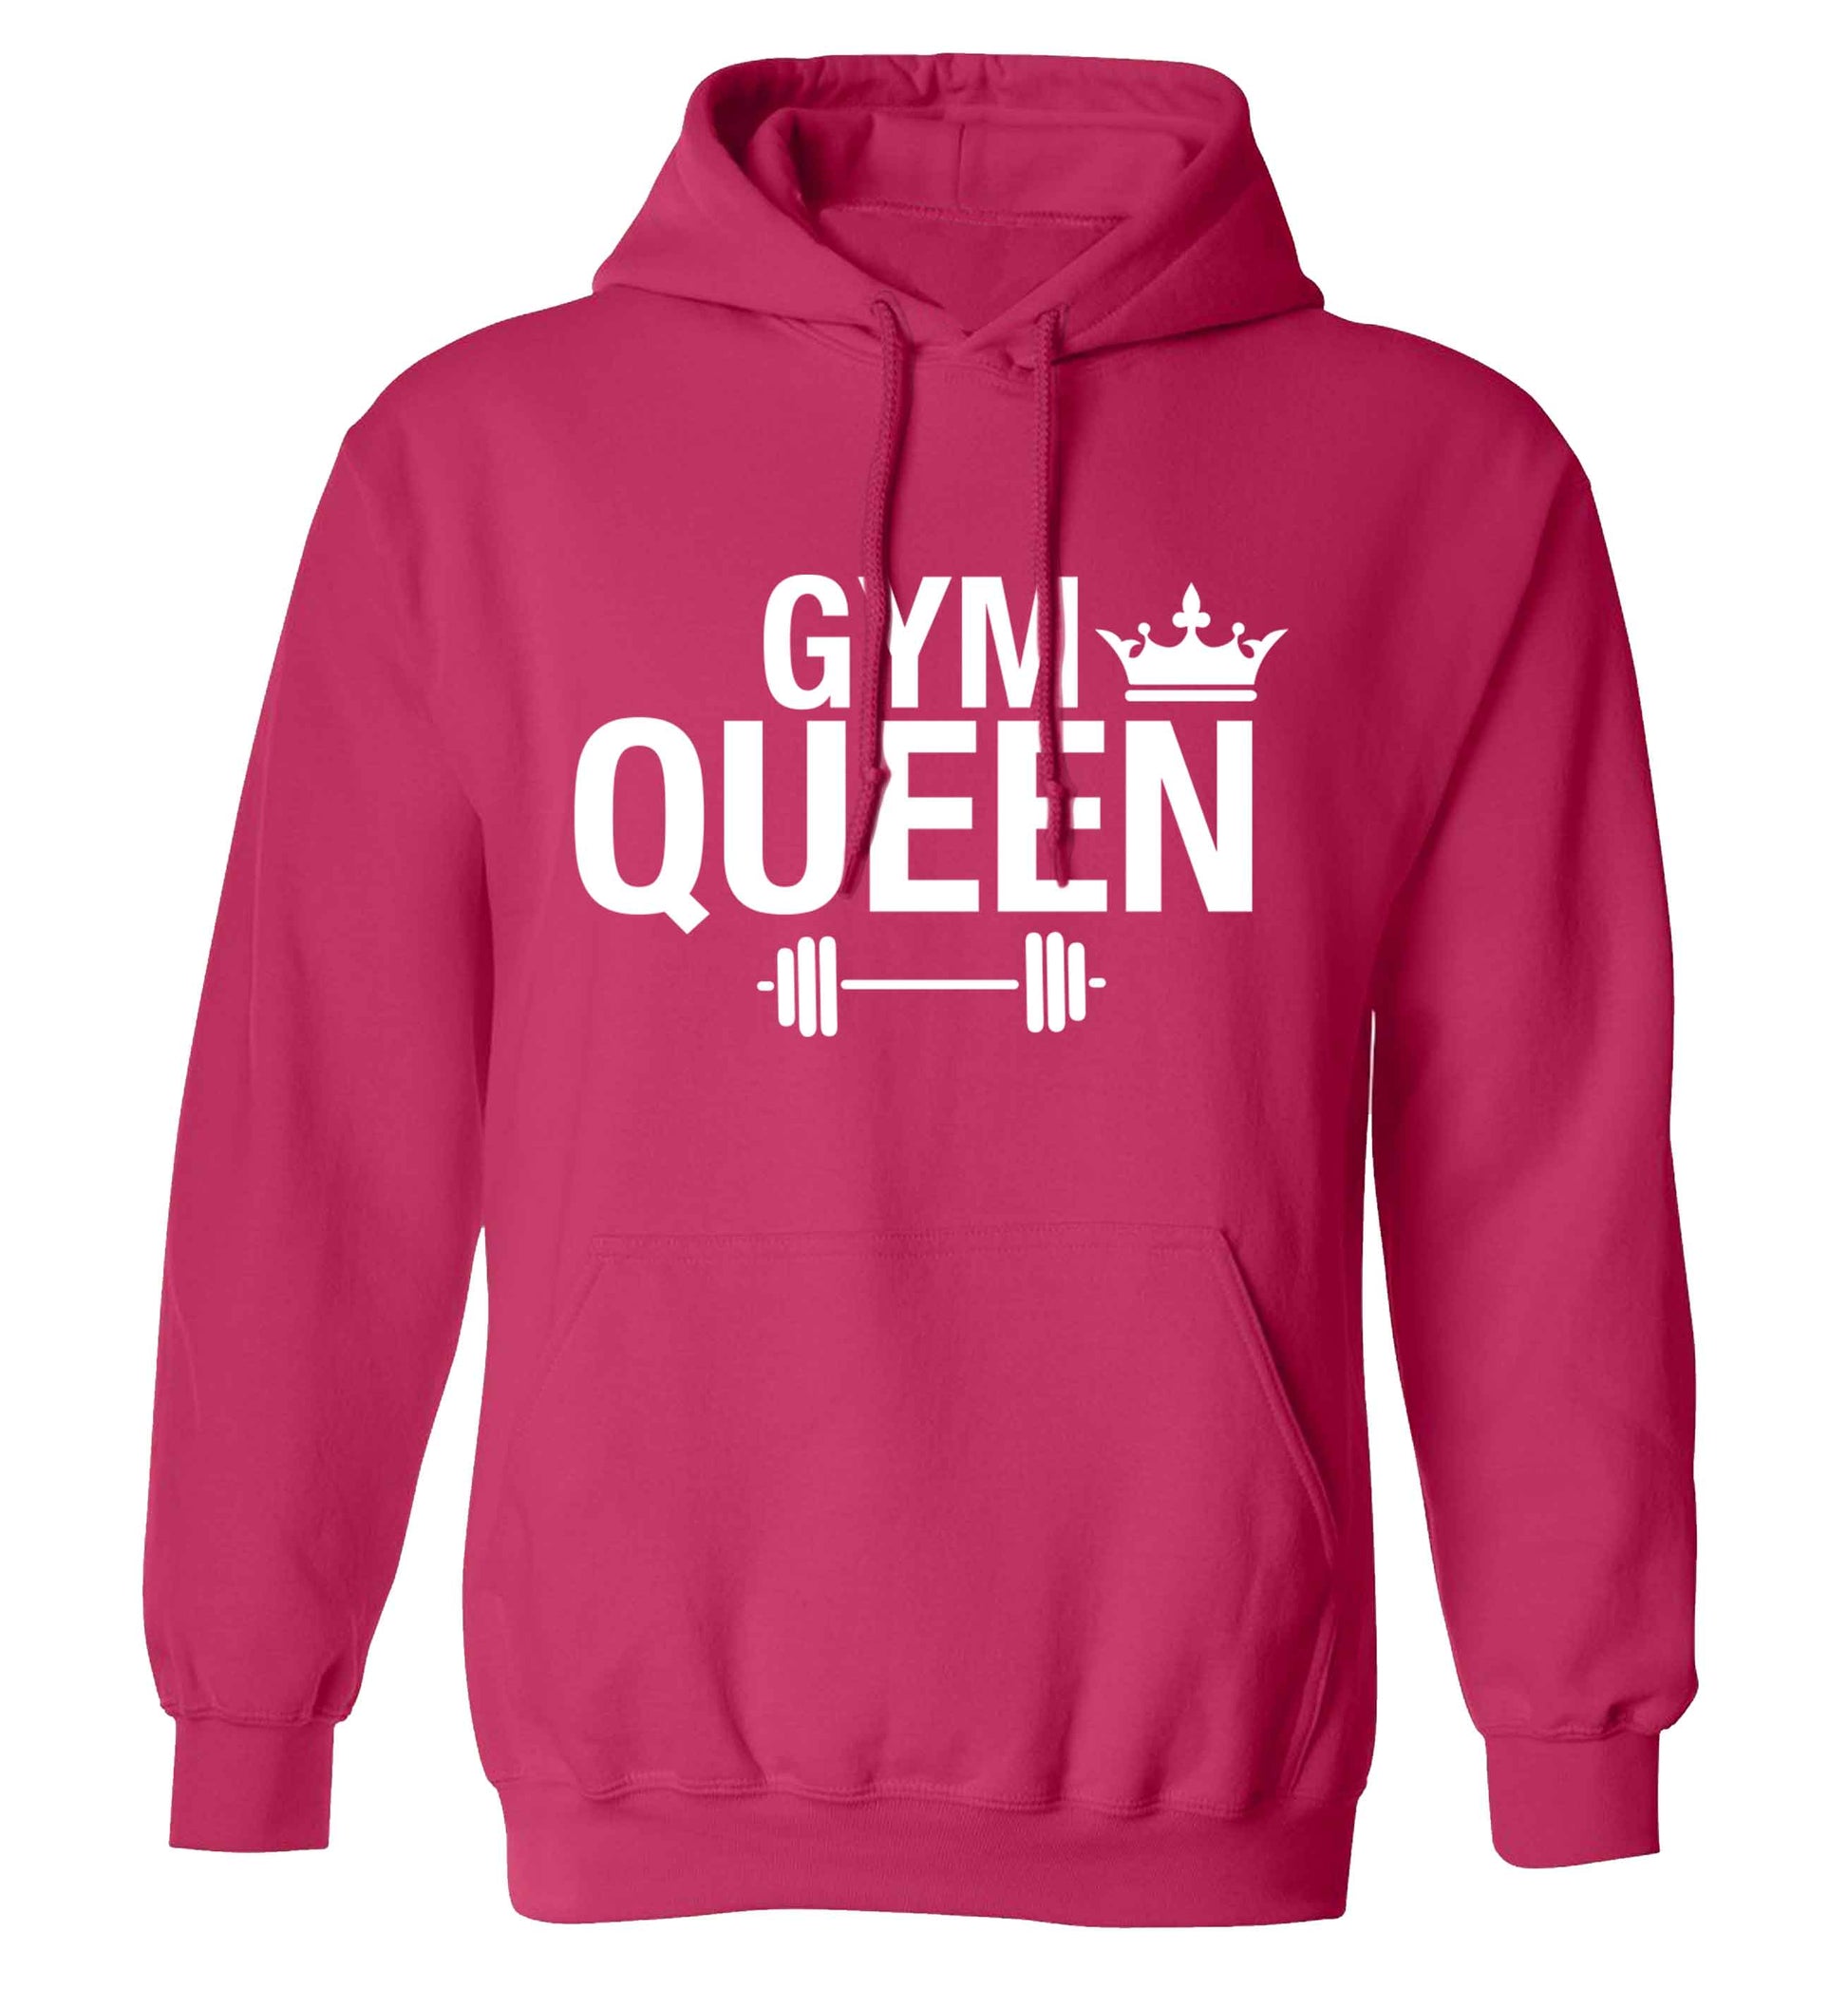 Gym queen adults unisex pink hoodie 2XL